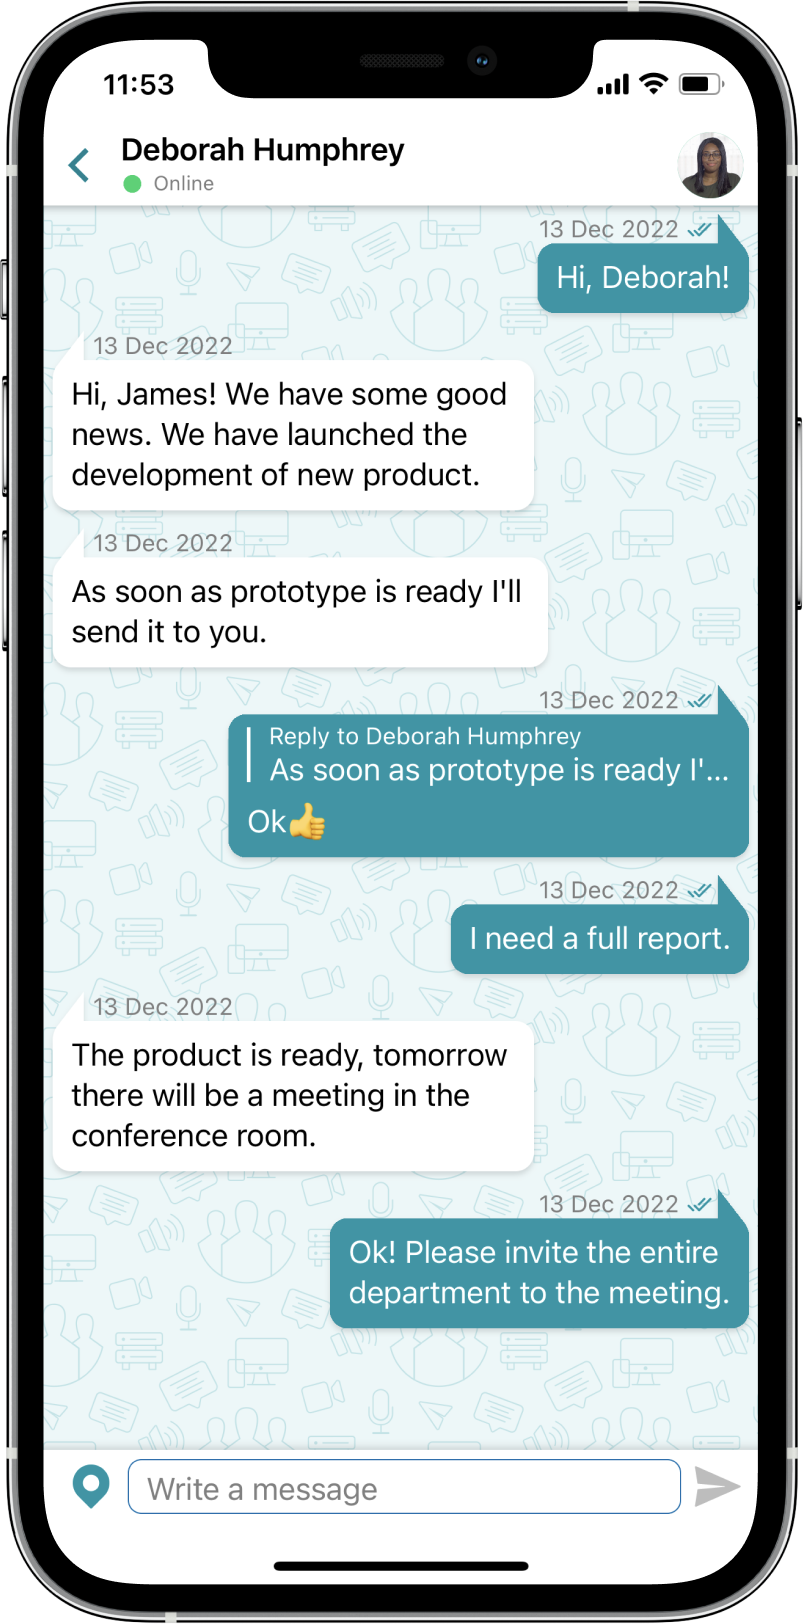 TrueConf 3.3 for iOS: new UI, Smart meeting mode, offline access to chats, contacts, and call history 11